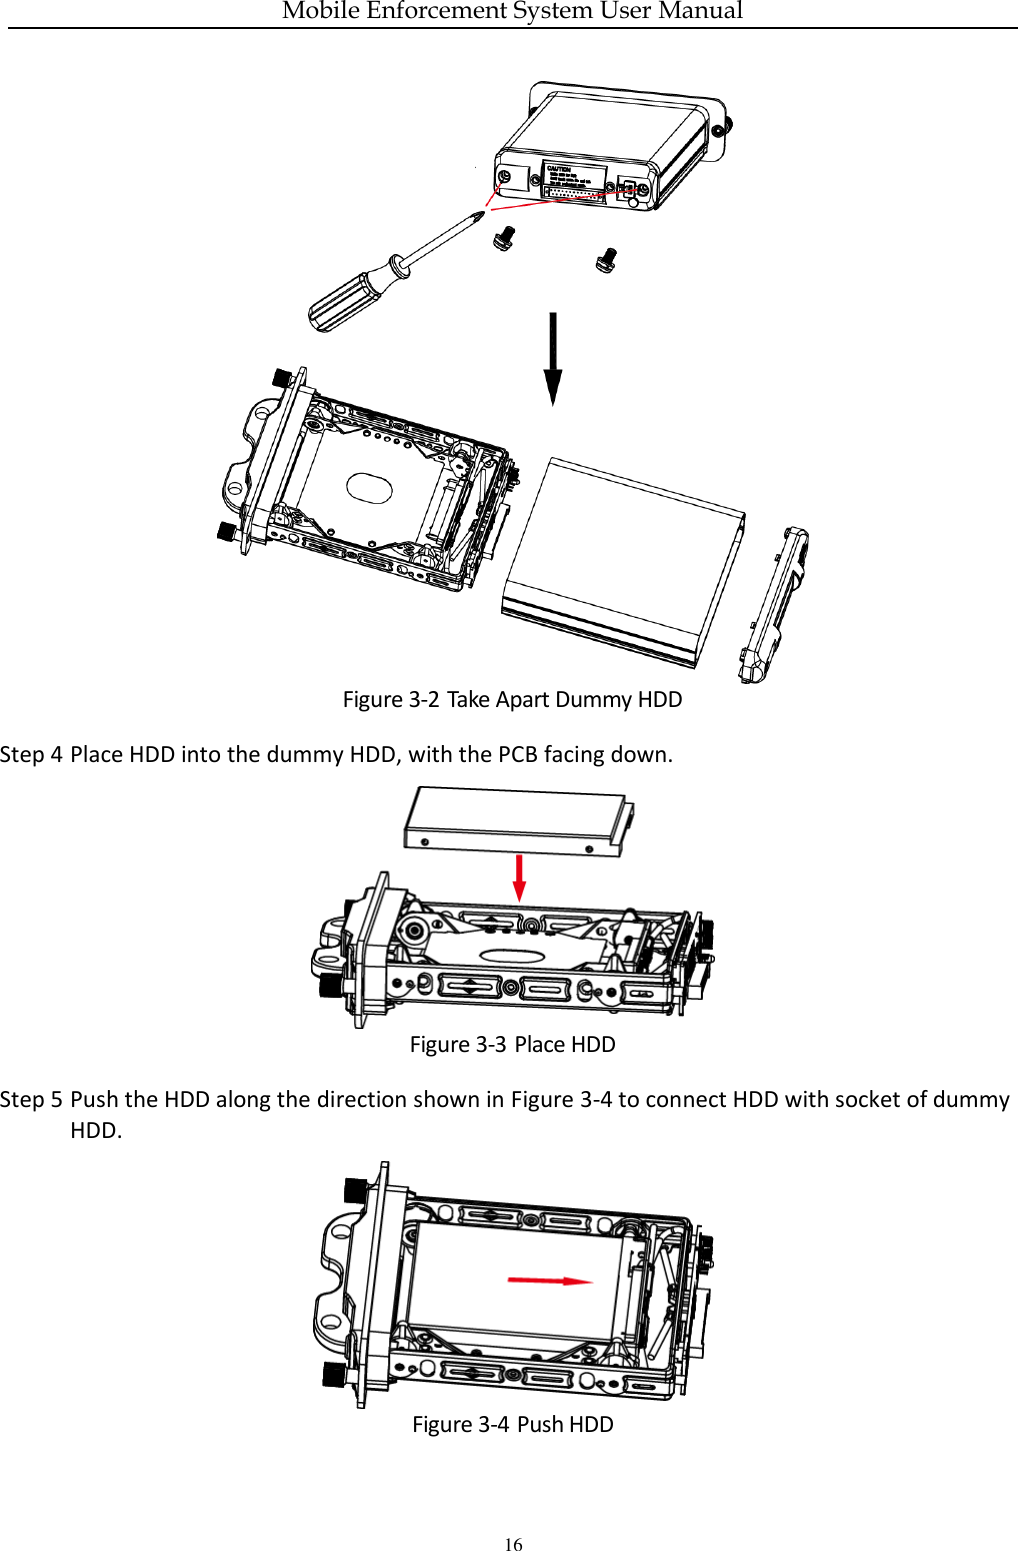 Mobile Enforcement System User Manual 16  Figure 3-2 Take Apart Dummy HDD Step 4 Place HDD into the dummy HDD, with the PCB facing down.  Figure 3-3 Place HDD Step 5 Push the HDD along the direction shown in Figure 3-4 to connect HDD with socket of dummy HDD.  Figure 3-4 Push HDD 